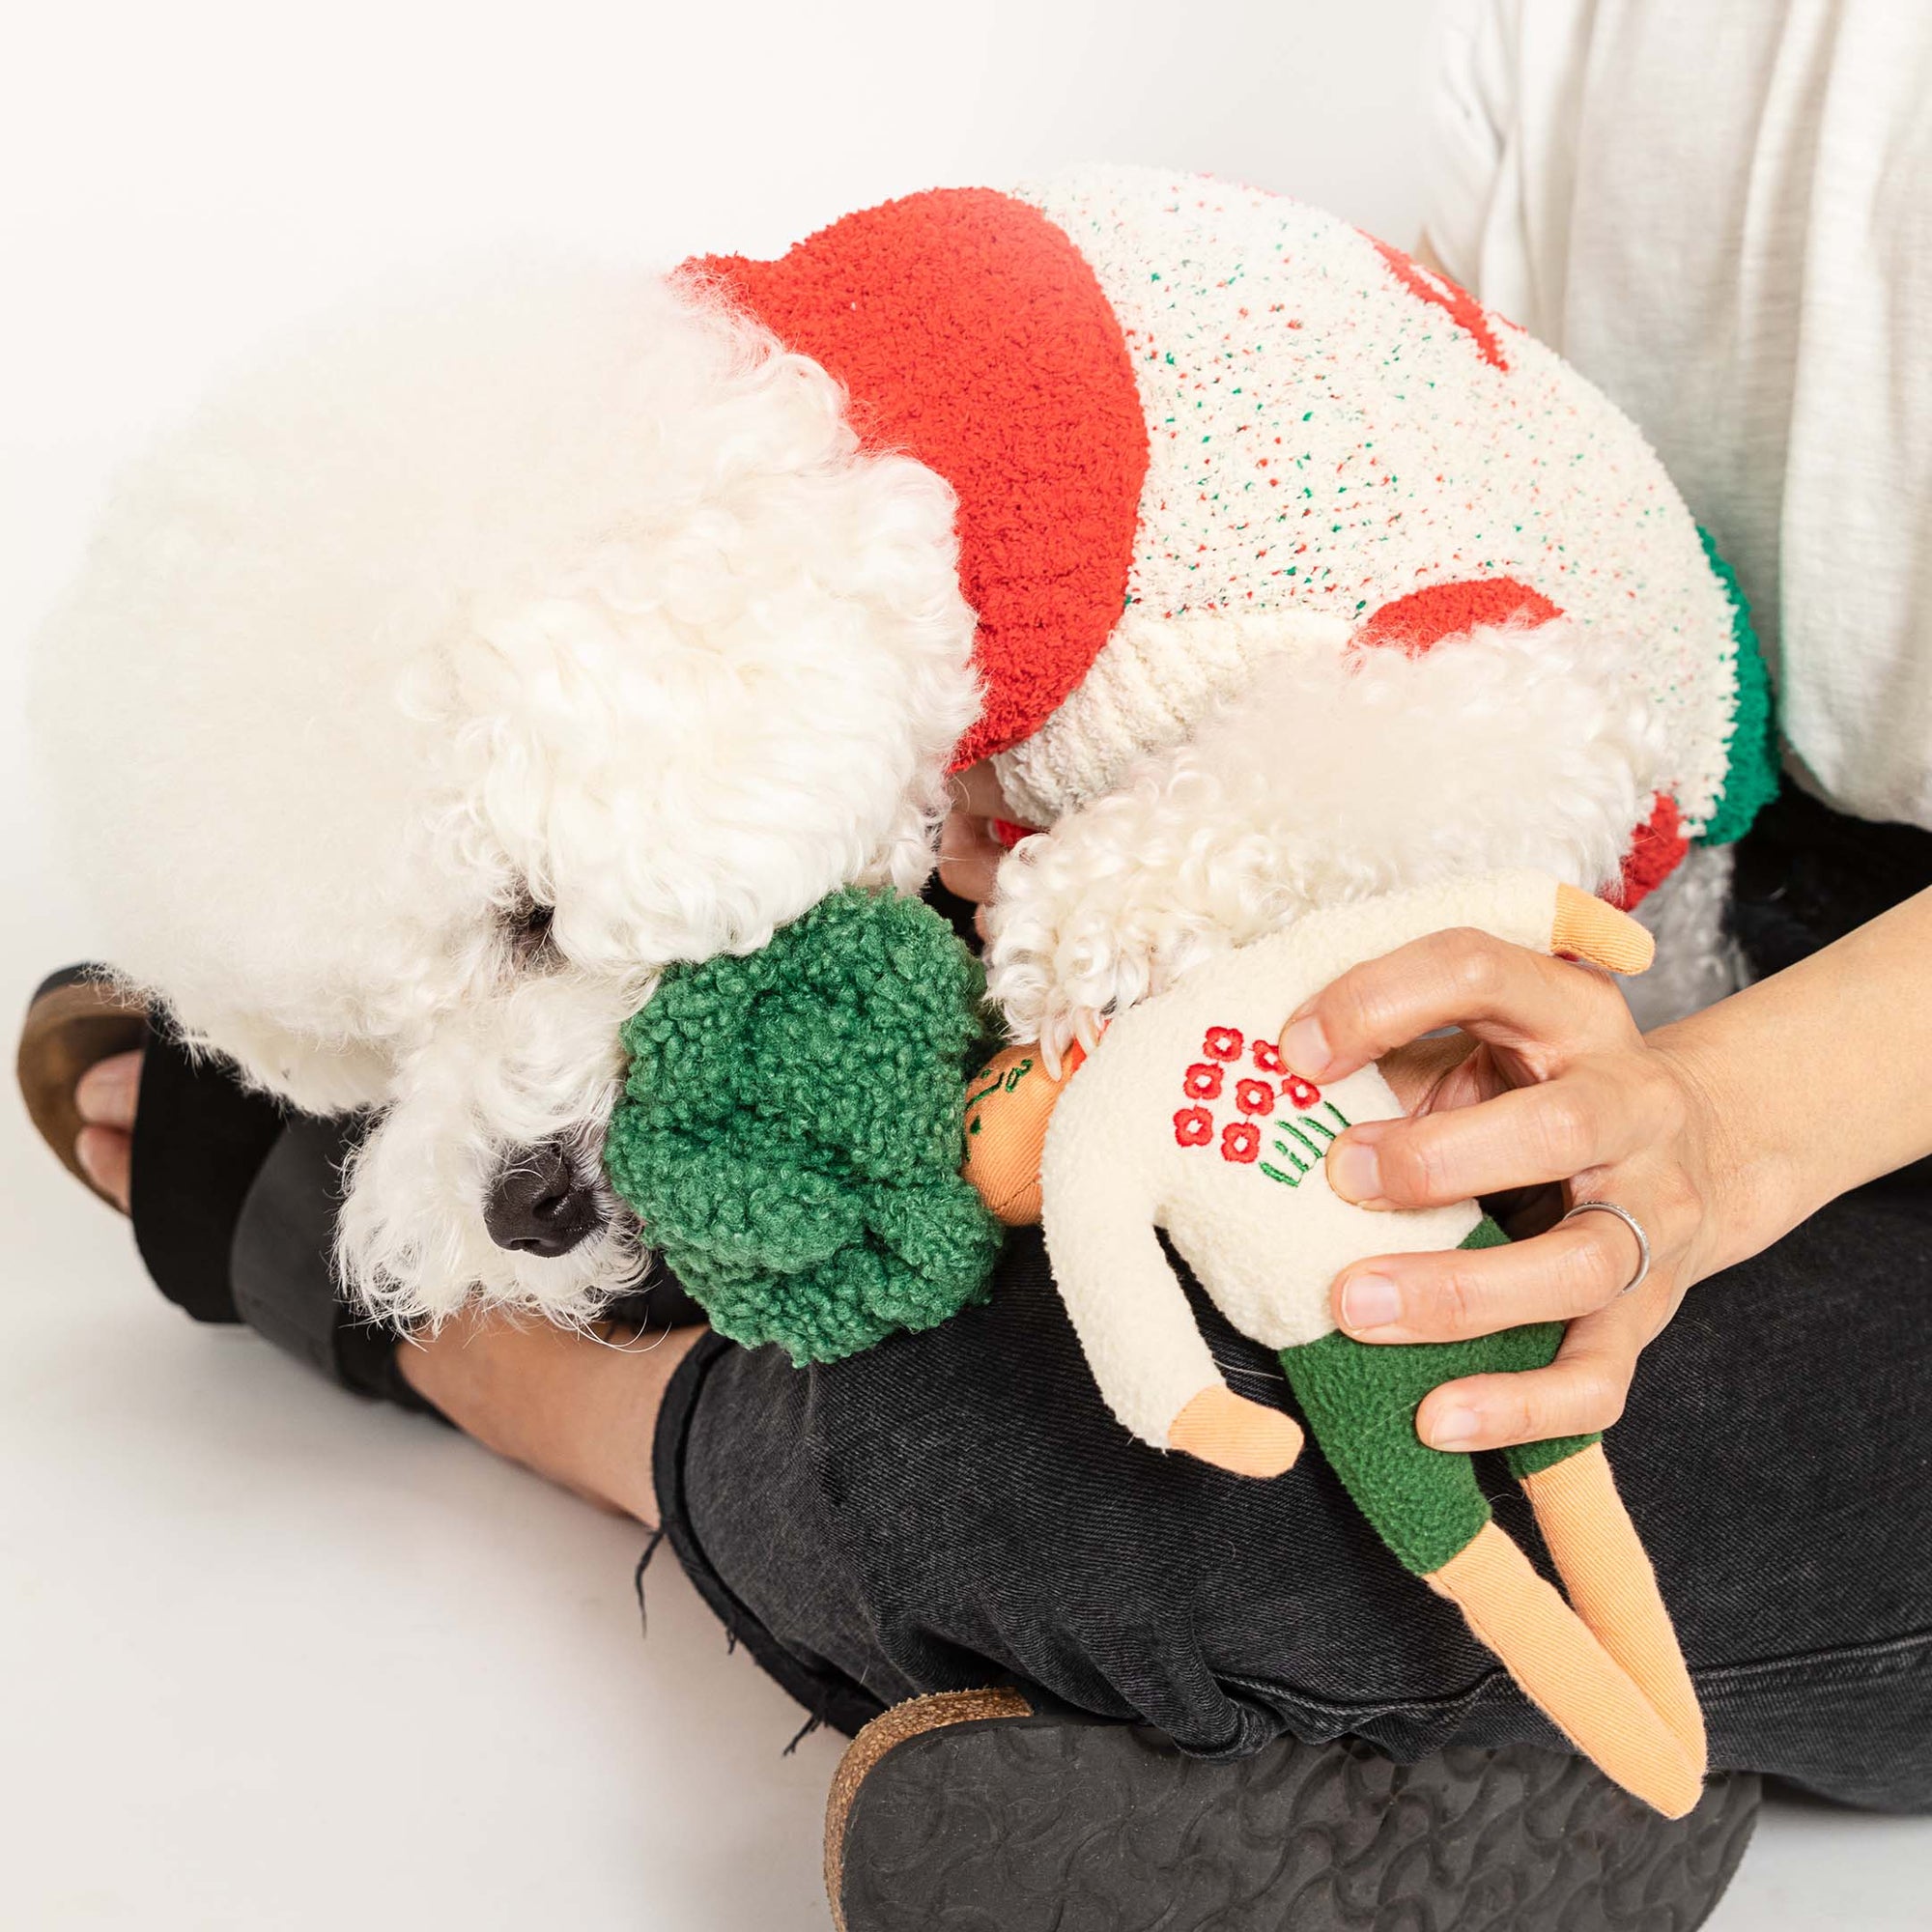 The photo captures a curly-haired white dog in a red and white sweater, sniffing a green-haired nosework toy held by a person. This cozy interaction, set against a white background, illustrates the use of the toy to engage the dog's sense of smell, offering both comfort and mental stimulation for the pet.